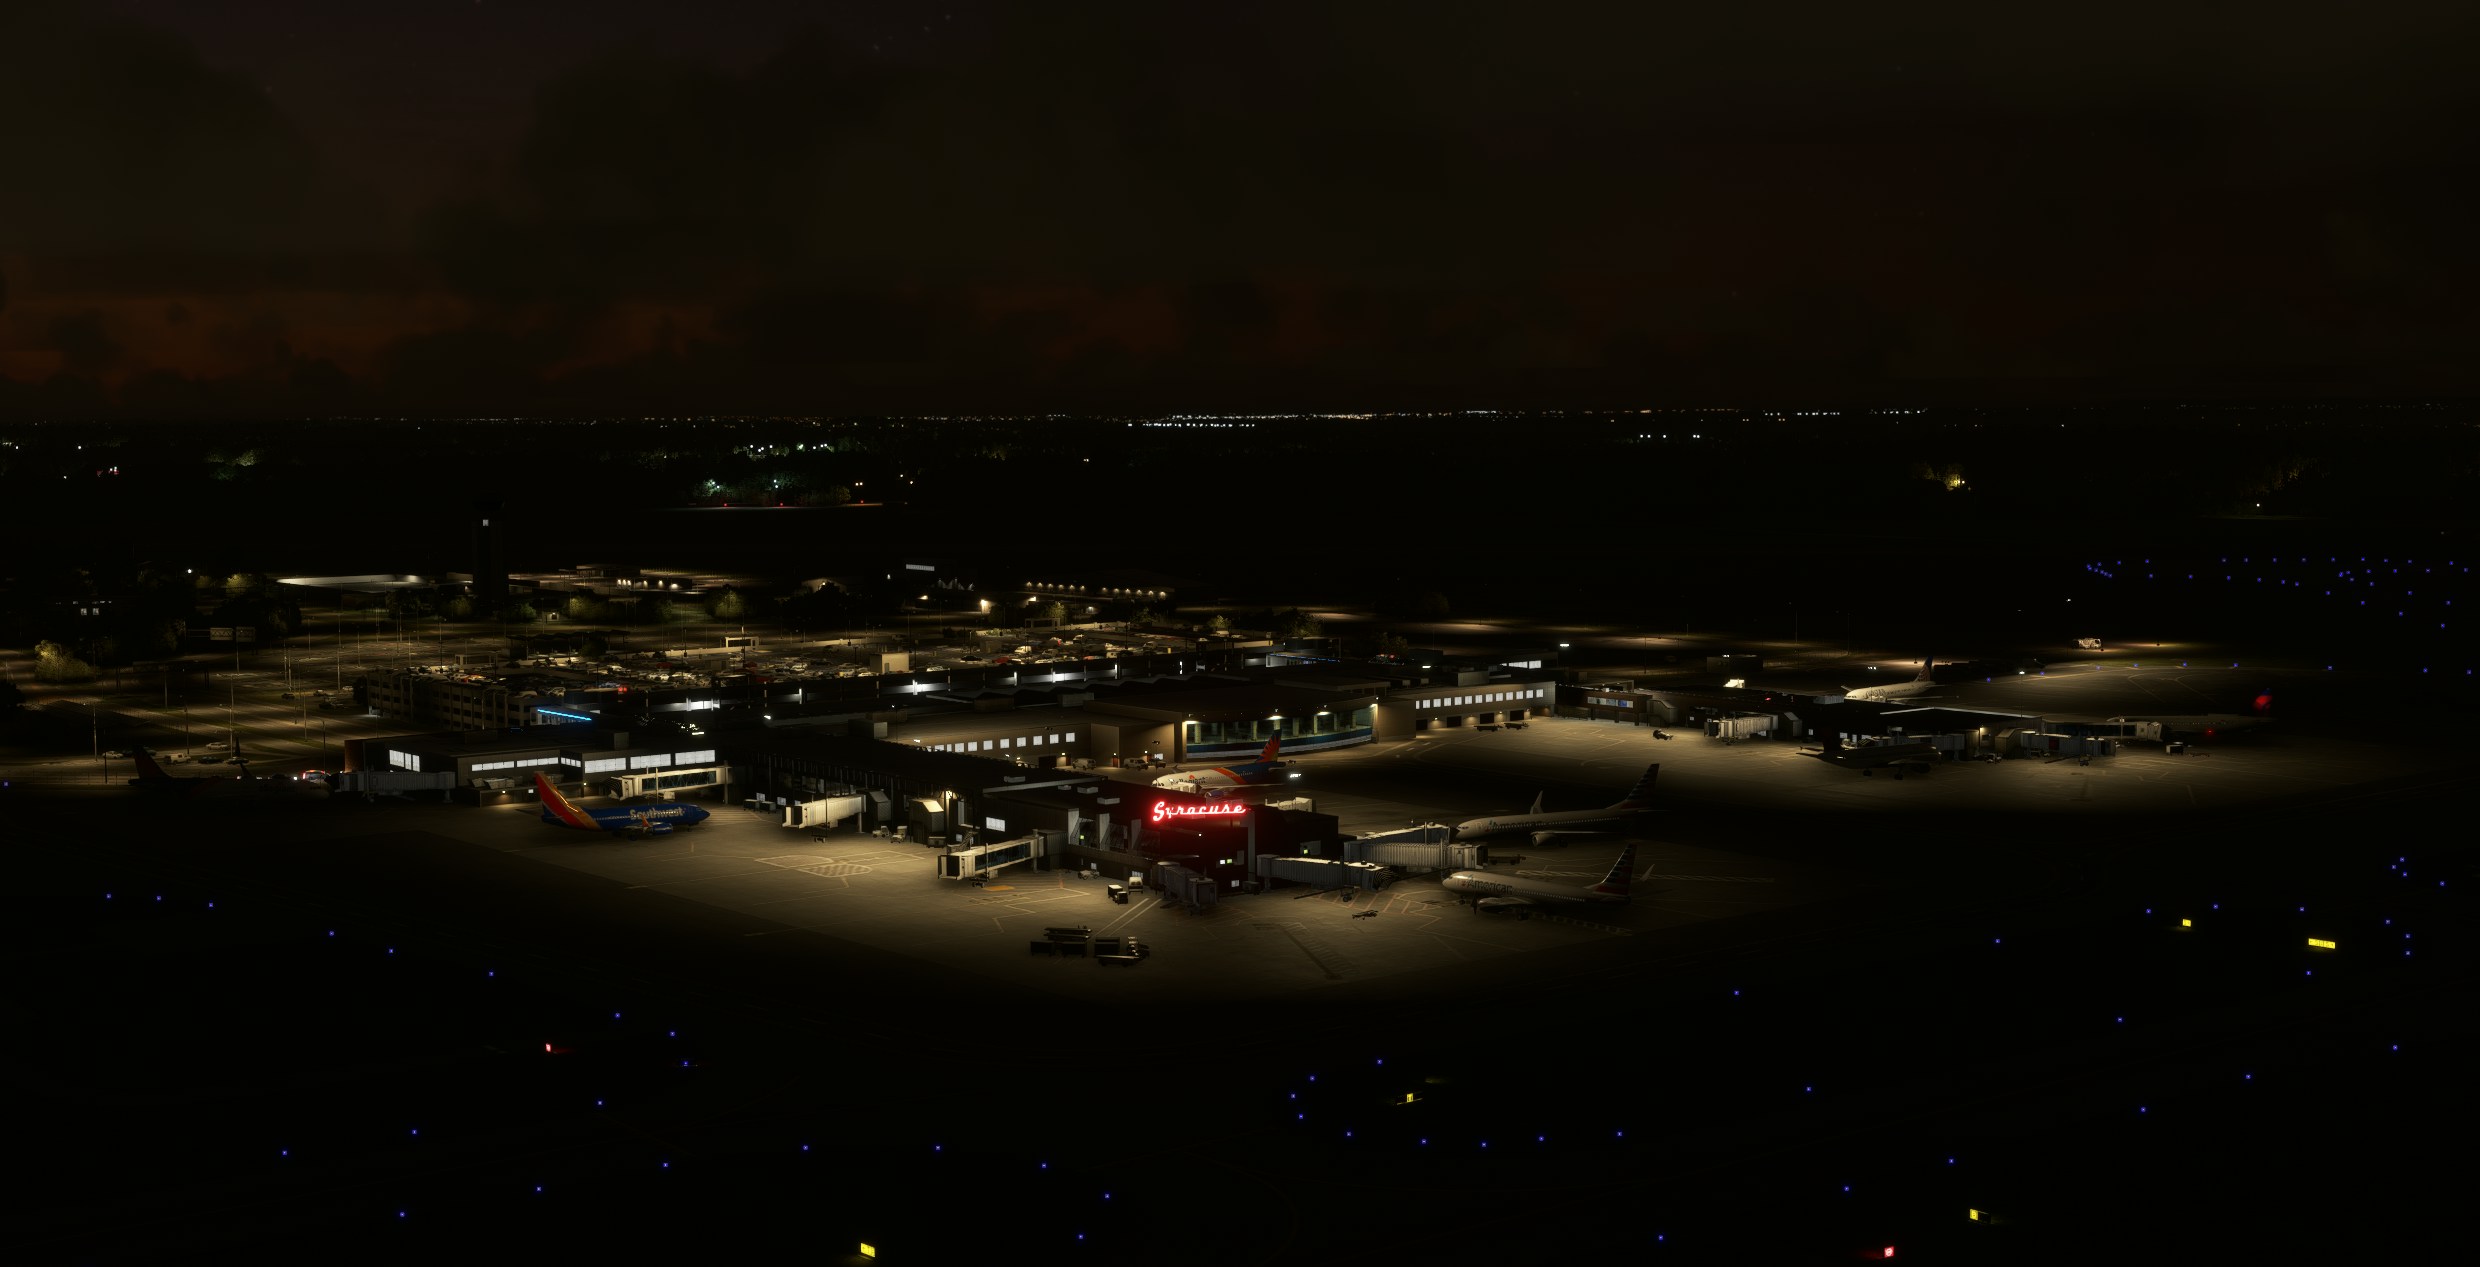 Verticalsim releases Syracuse Hancock International Airport for MSFS